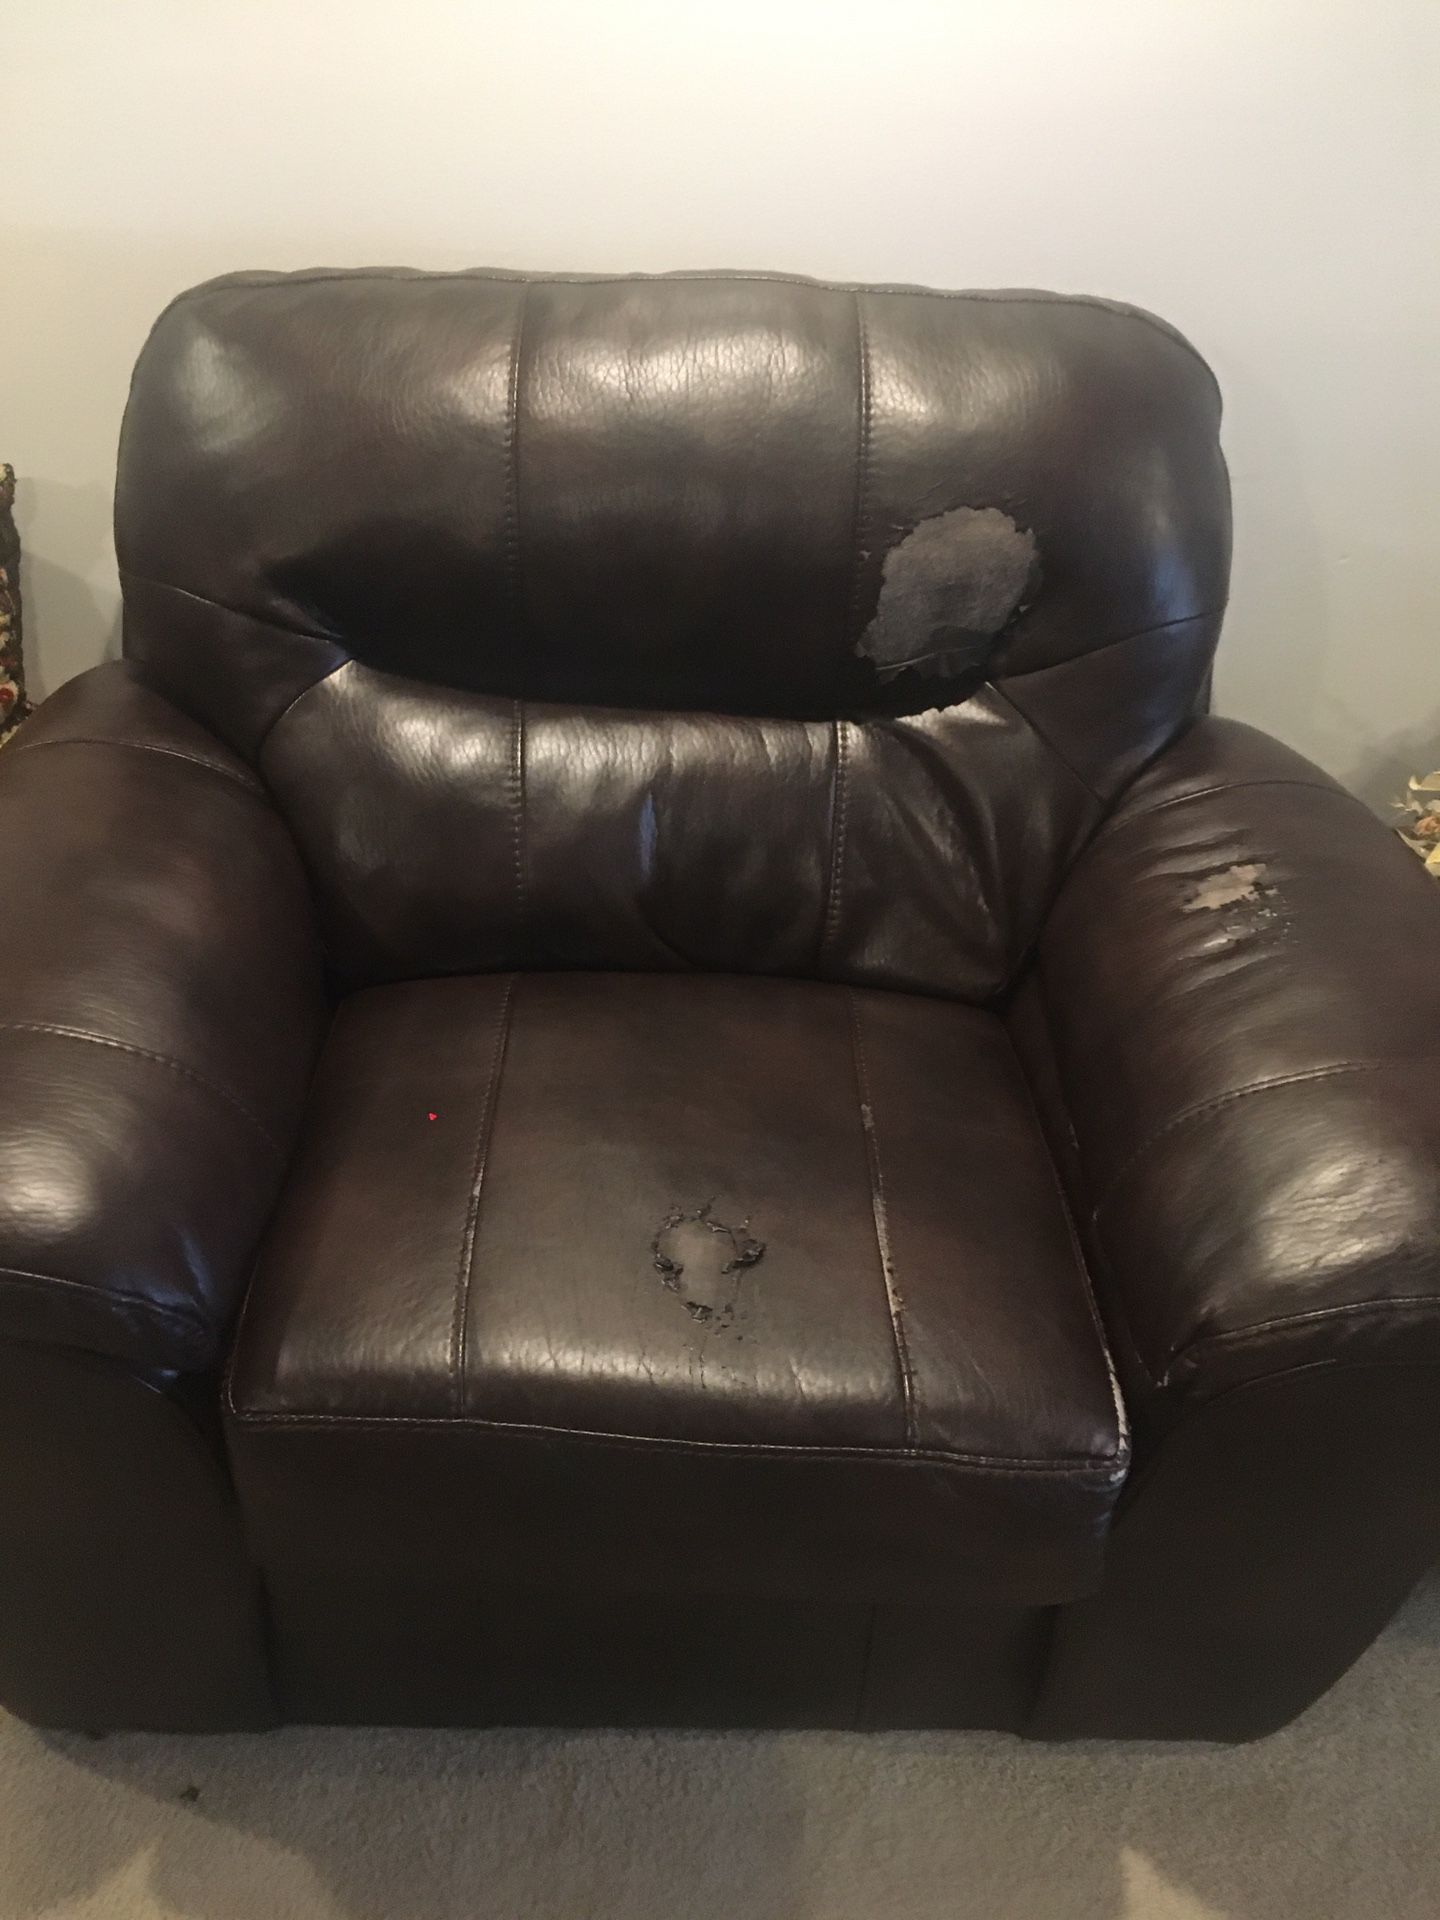 One three seater sofa and a chair both are only $75